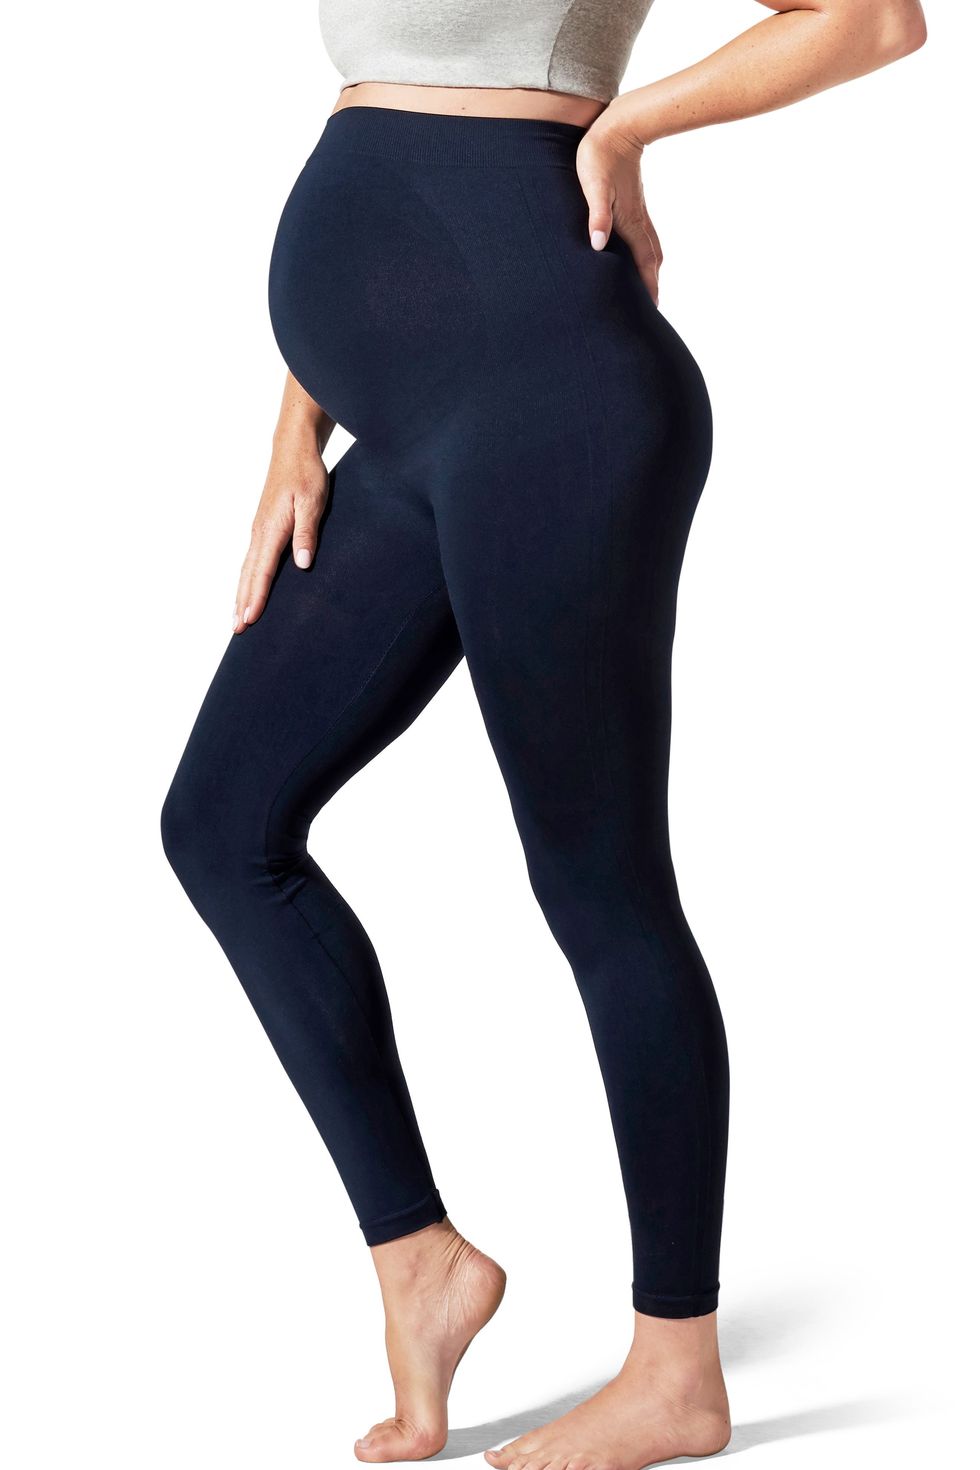 Blanqi Everyday Maternity Belly Support Crop Leggings - Oil Blue